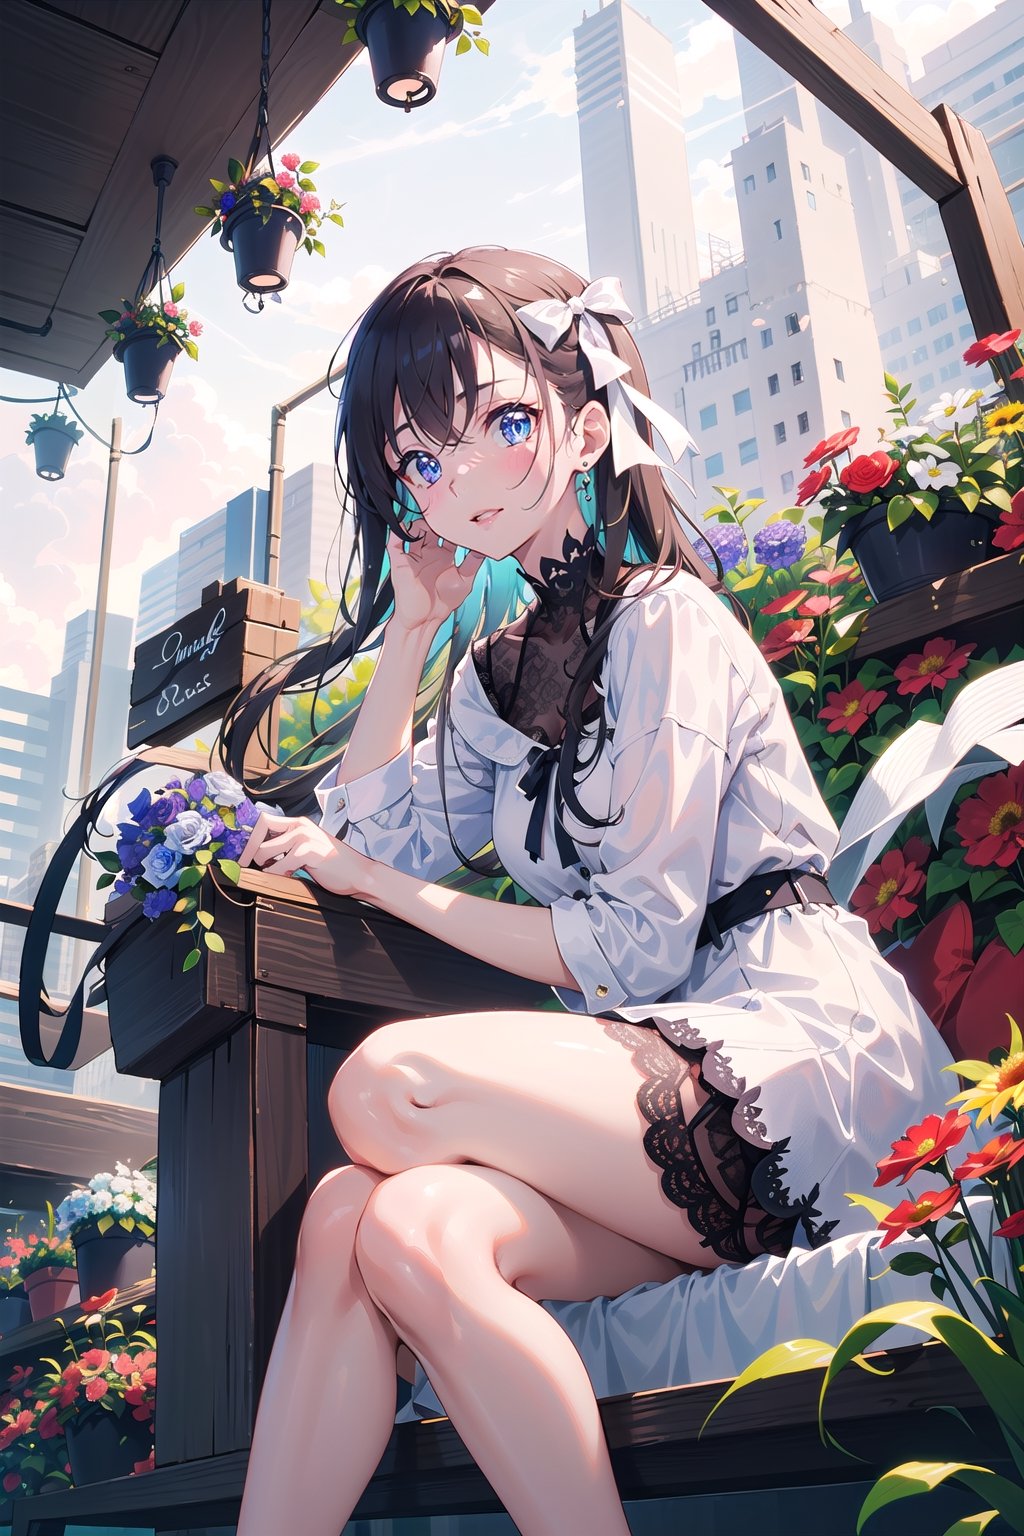 masterpiece, best quality, 1 girl, flowers, floral background, nature, pose, perfect hands, modern outfit, detailed, sparkling, sitting, lace detail, long hair, ultra detailed, ultra detailed face, clear eyes, good lighting,, perfect anatomy, stylish white outfit, different hairstyles, hair ribbons